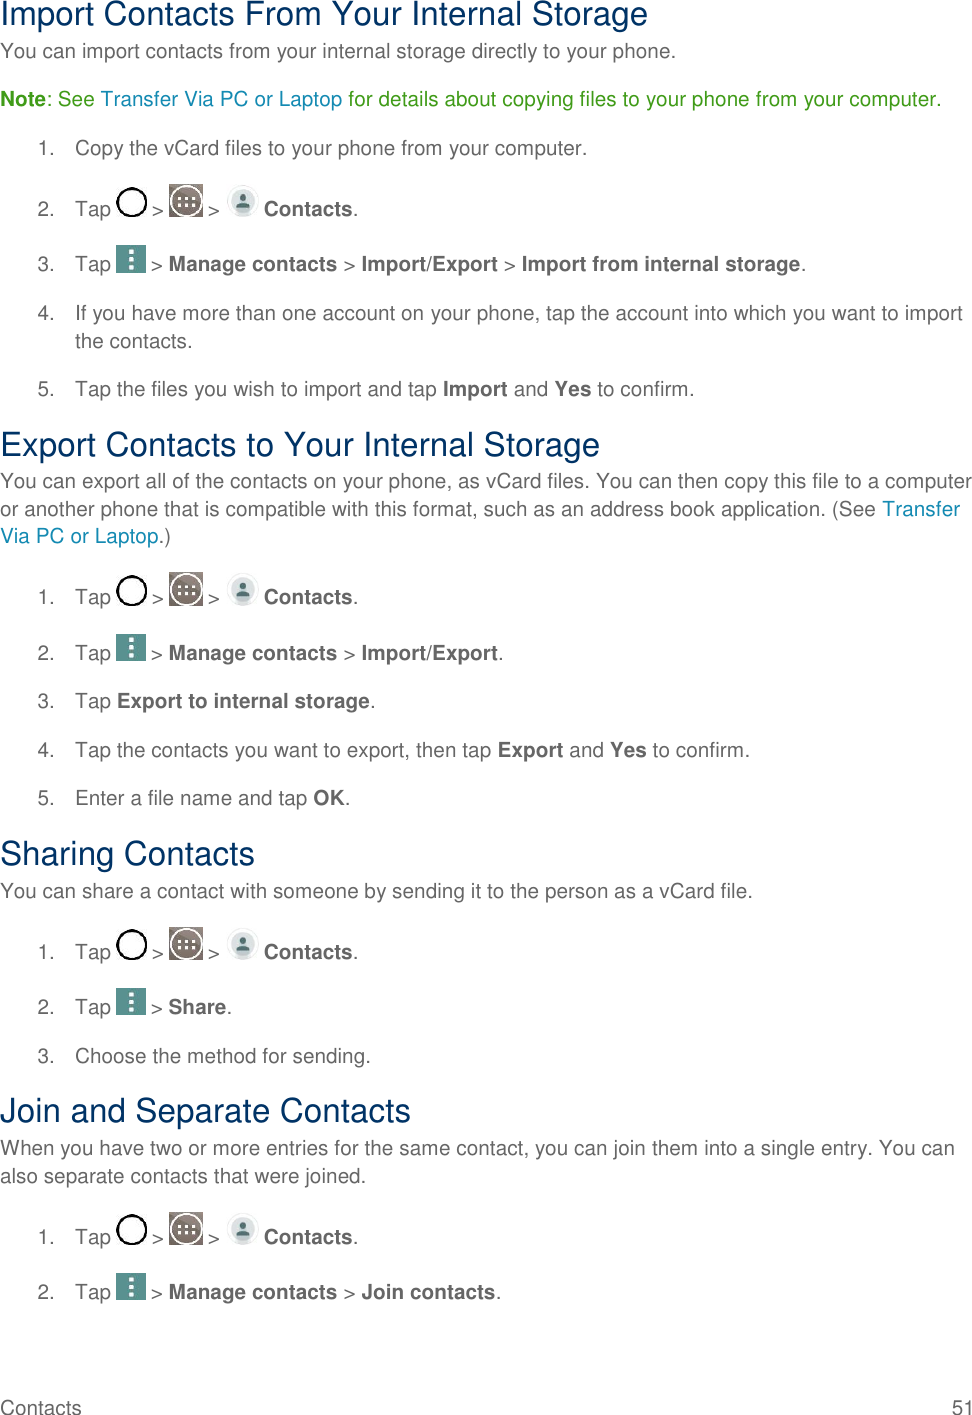 Contacts  51 Import Contacts From Your Internal Storage You can import contacts from your internal storage directly to your phone. Note: See Transfer Via PC or Laptop for details about copying files to your phone from your computer. 1.  Copy the vCard files to your phone from your computer. 2.  Tap   &gt;   &gt;   Contacts. 3.  Tap   &gt; Manage contacts &gt; Import/Export &gt; Import from internal storage. 4.  If you have more than one account on your phone, tap the account into which you want to import the contacts. 5.  Tap the files you wish to import and tap Import and Yes to confirm. Export Contacts to Your Internal Storage You can export all of the contacts on your phone, as vCard files. You can then copy this file to a computer or another phone that is compatible with this format, such as an address book application. (See Transfer Via PC or Laptop.) 1.  Tap   &gt;   &gt;   Contacts. 2.  Tap   &gt; Manage contacts &gt; Import/Export. 3.  Tap Export to internal storage. 4.  Tap the contacts you want to export, then tap Export and Yes to confirm. 5.  Enter a file name and tap OK. Sharing Contacts You can share a contact with someone by sending it to the person as a vCard file. 1.  Tap   &gt;   &gt;   Contacts. 2.  Tap   &gt; Share. 3.  Choose the method for sending. Join and Separate Contacts When you have two or more entries for the same contact, you can join them into a single entry. You can also separate contacts that were joined. 1.  Tap   &gt;   &gt;   Contacts. 2.  Tap   &gt; Manage contacts &gt; Join contacts. 